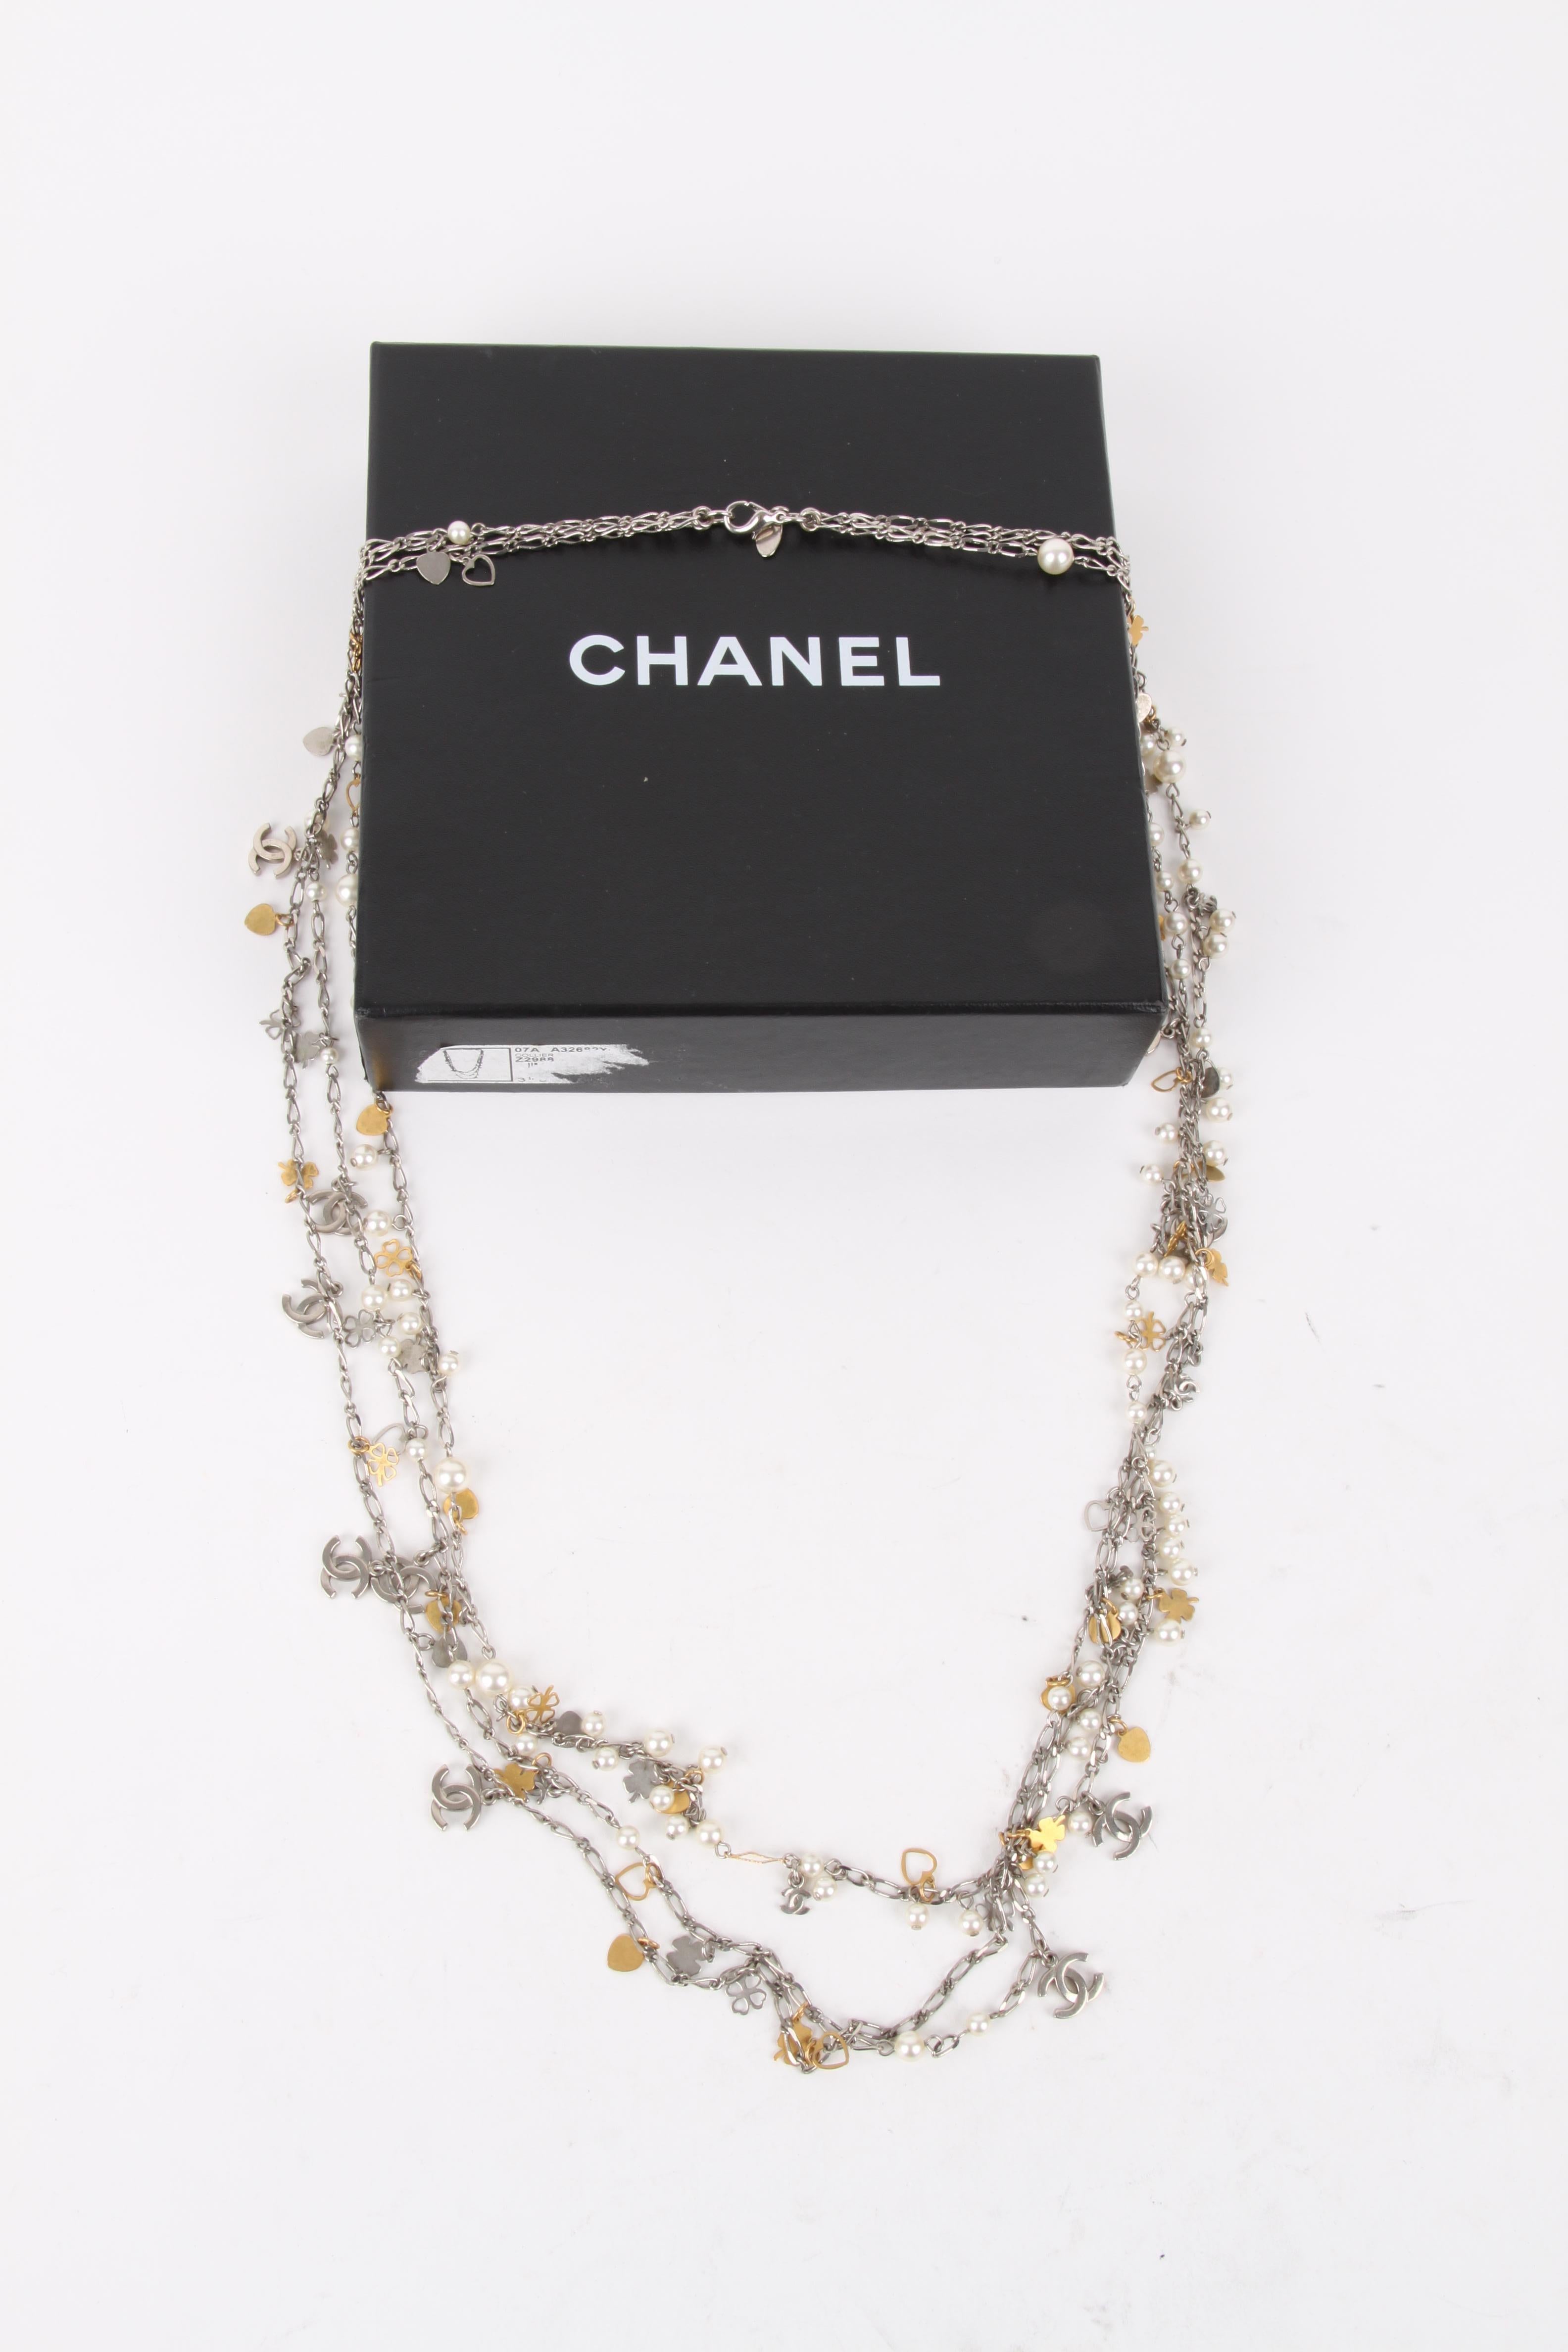 Chanel Fall/Winter 2007 (07A) Silver Gold Multi-Strand Chain Hearts Clover Faux Pearl CC Logo Necklace

Chanel Fall/Winter 2007 (07A) Silver Gold Multi-Strand Chain Hearts Clover Faux Pearl CC Logo Necklace.

This belt features a lux embellished